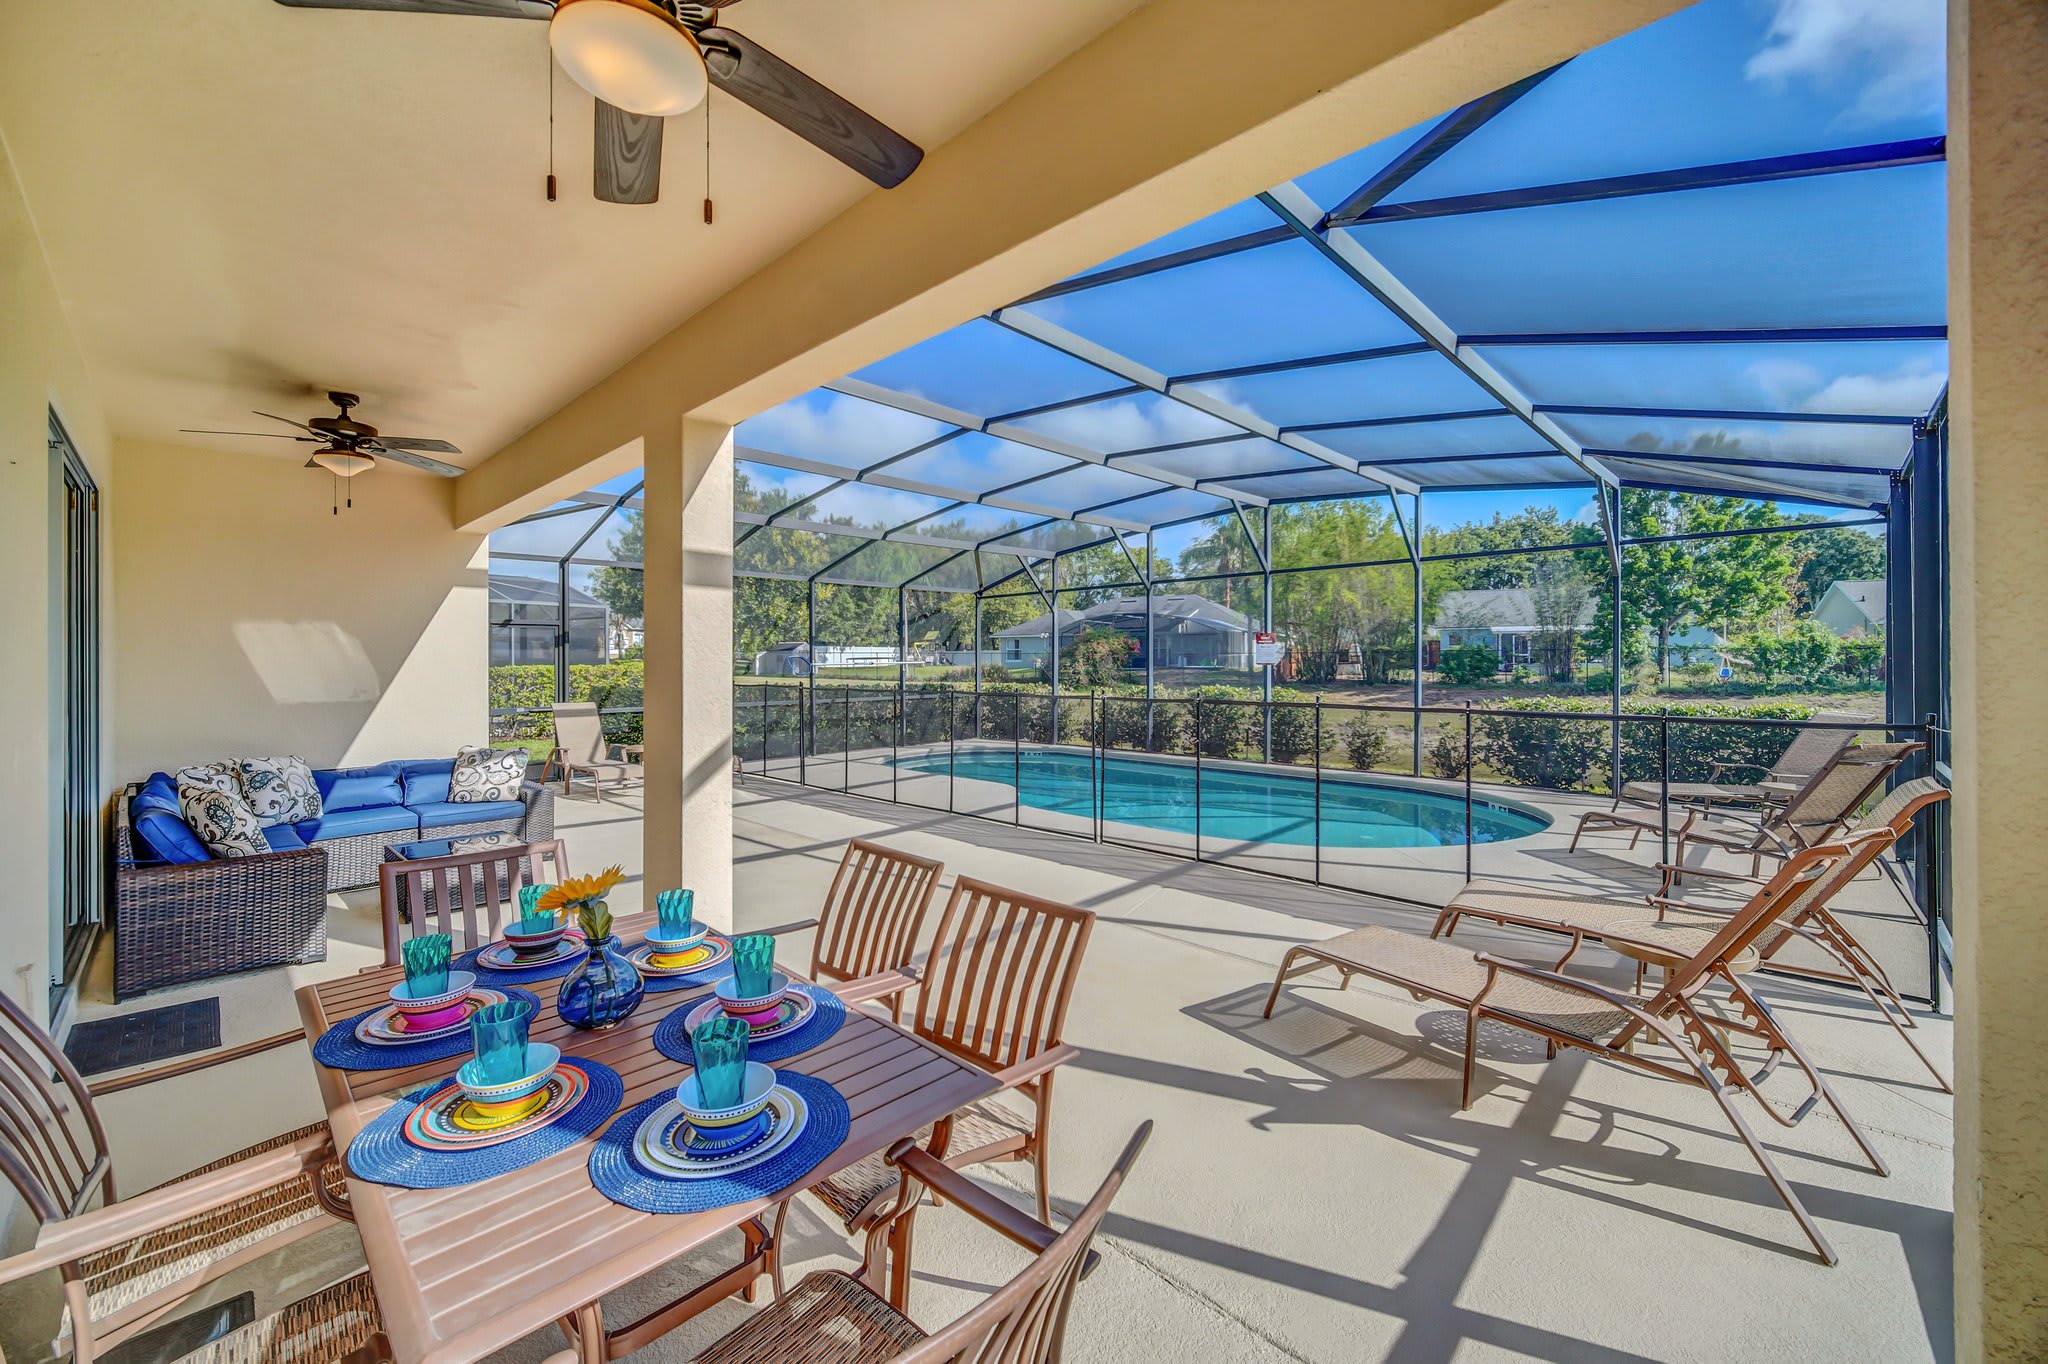 Orlando Vacation Rentals with Private Pool - Solterra Resort - Short Walk to Clubhouse